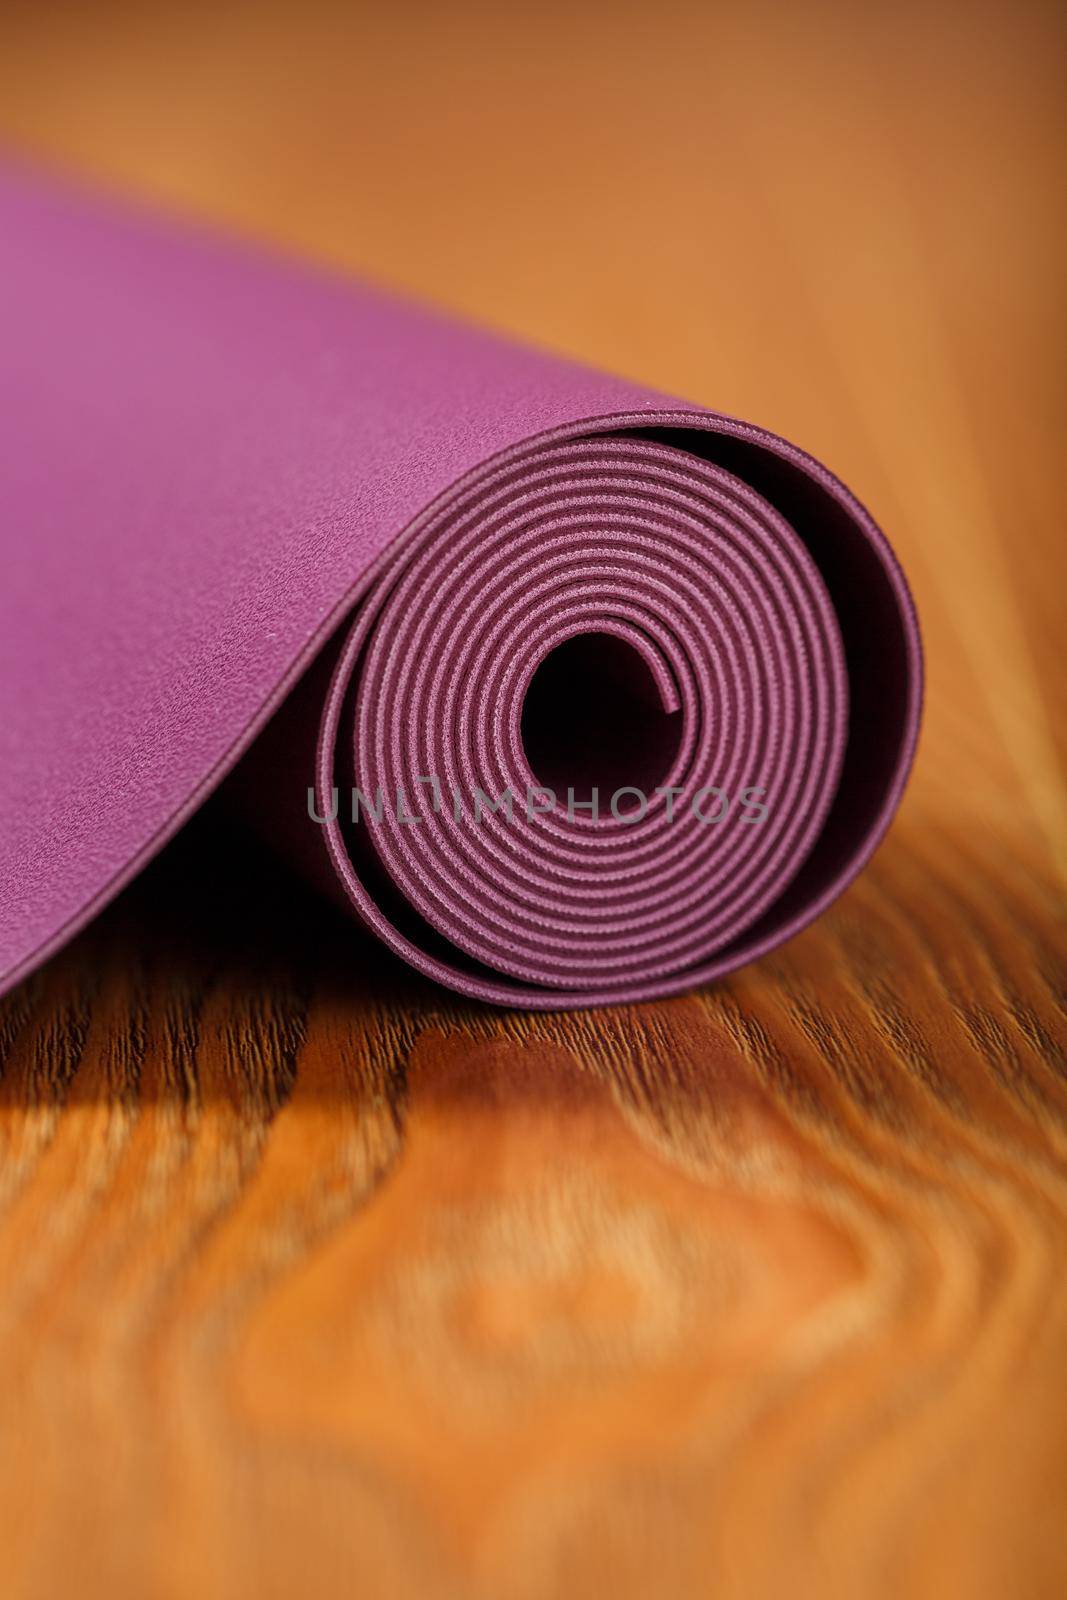 A lilac-colored yoga mat is spread out in a roll on the wooden floor. by AlexGrec